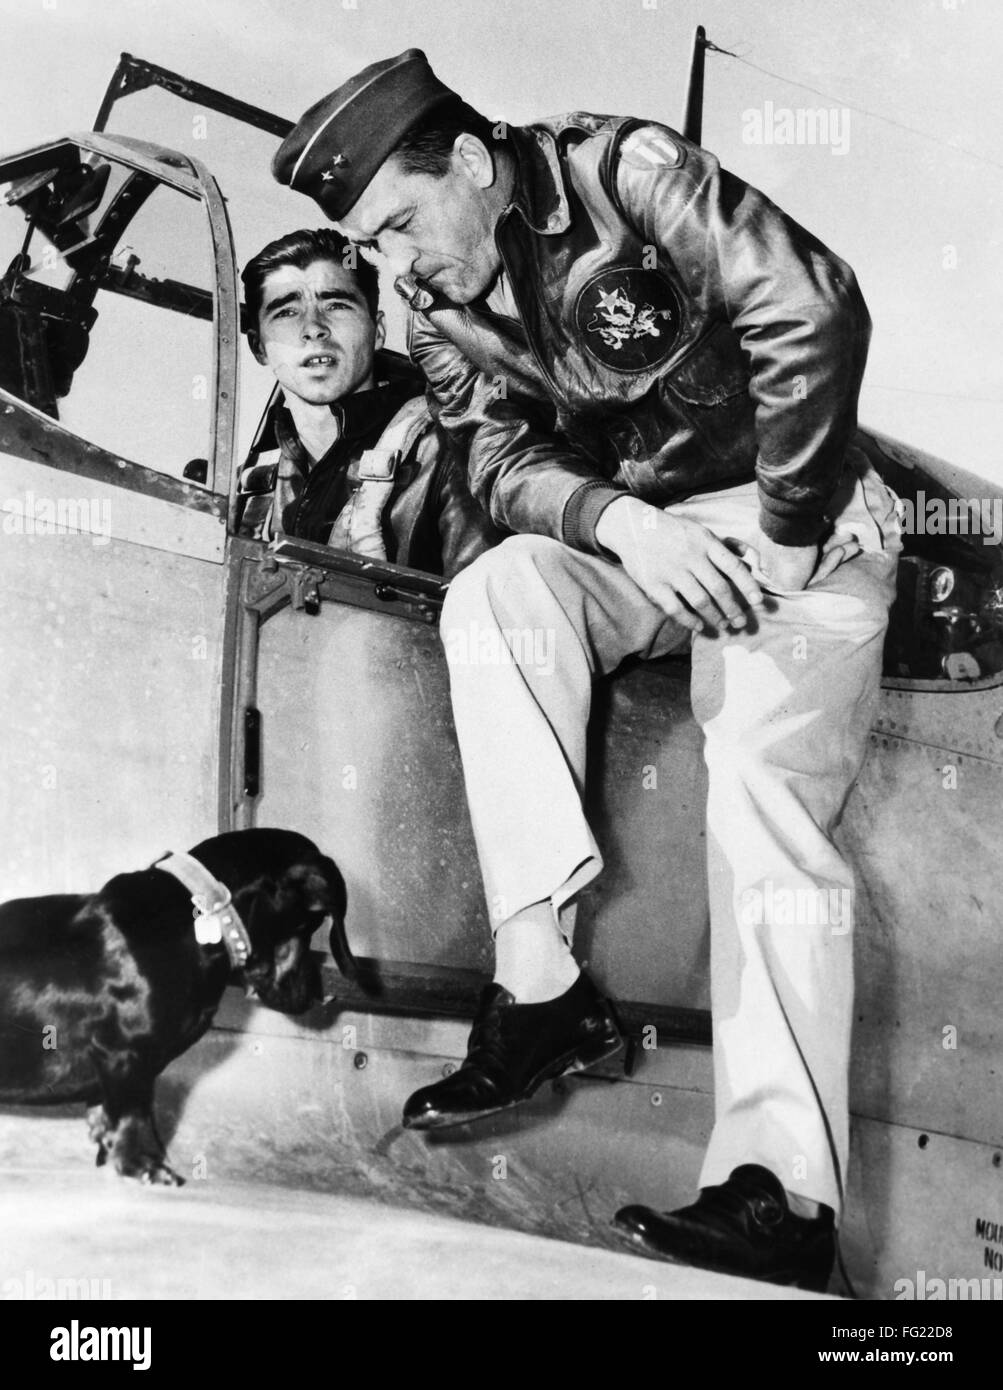 CLAIRE LEE CHENNAULT /n(1893-1958). American military aviator. Photographed  sitting on the side of a fighter plane's cockpit, with Captain Burton  Rodier and a dachshund, c1941 Stock Photo - Alamy